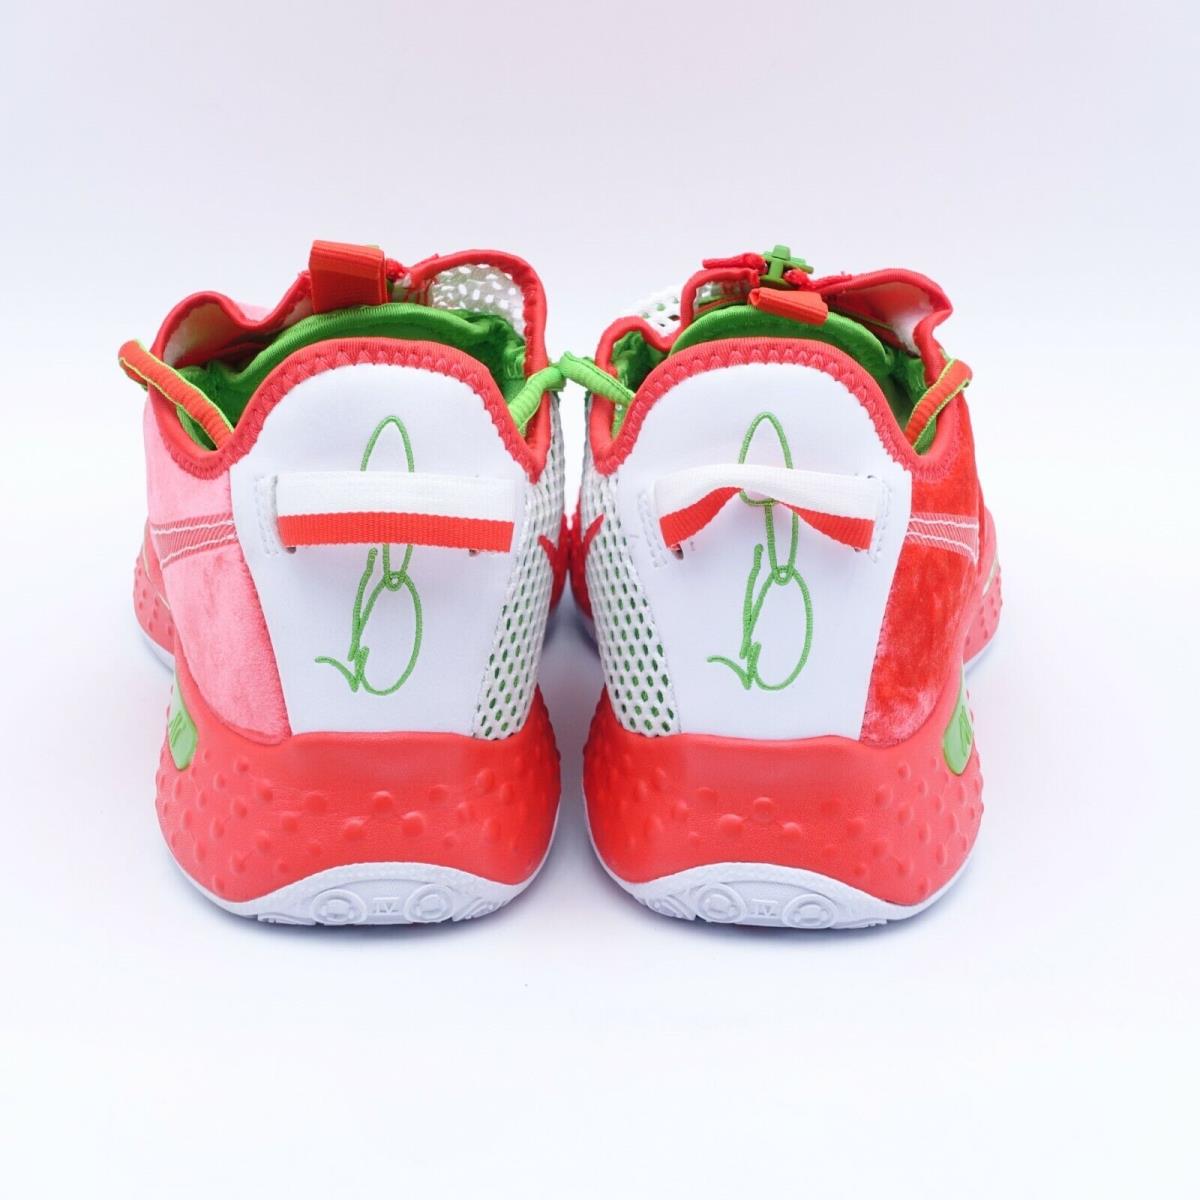 Nike shoes  - Red , Christmas/Red/White/Green Manufacturer 5